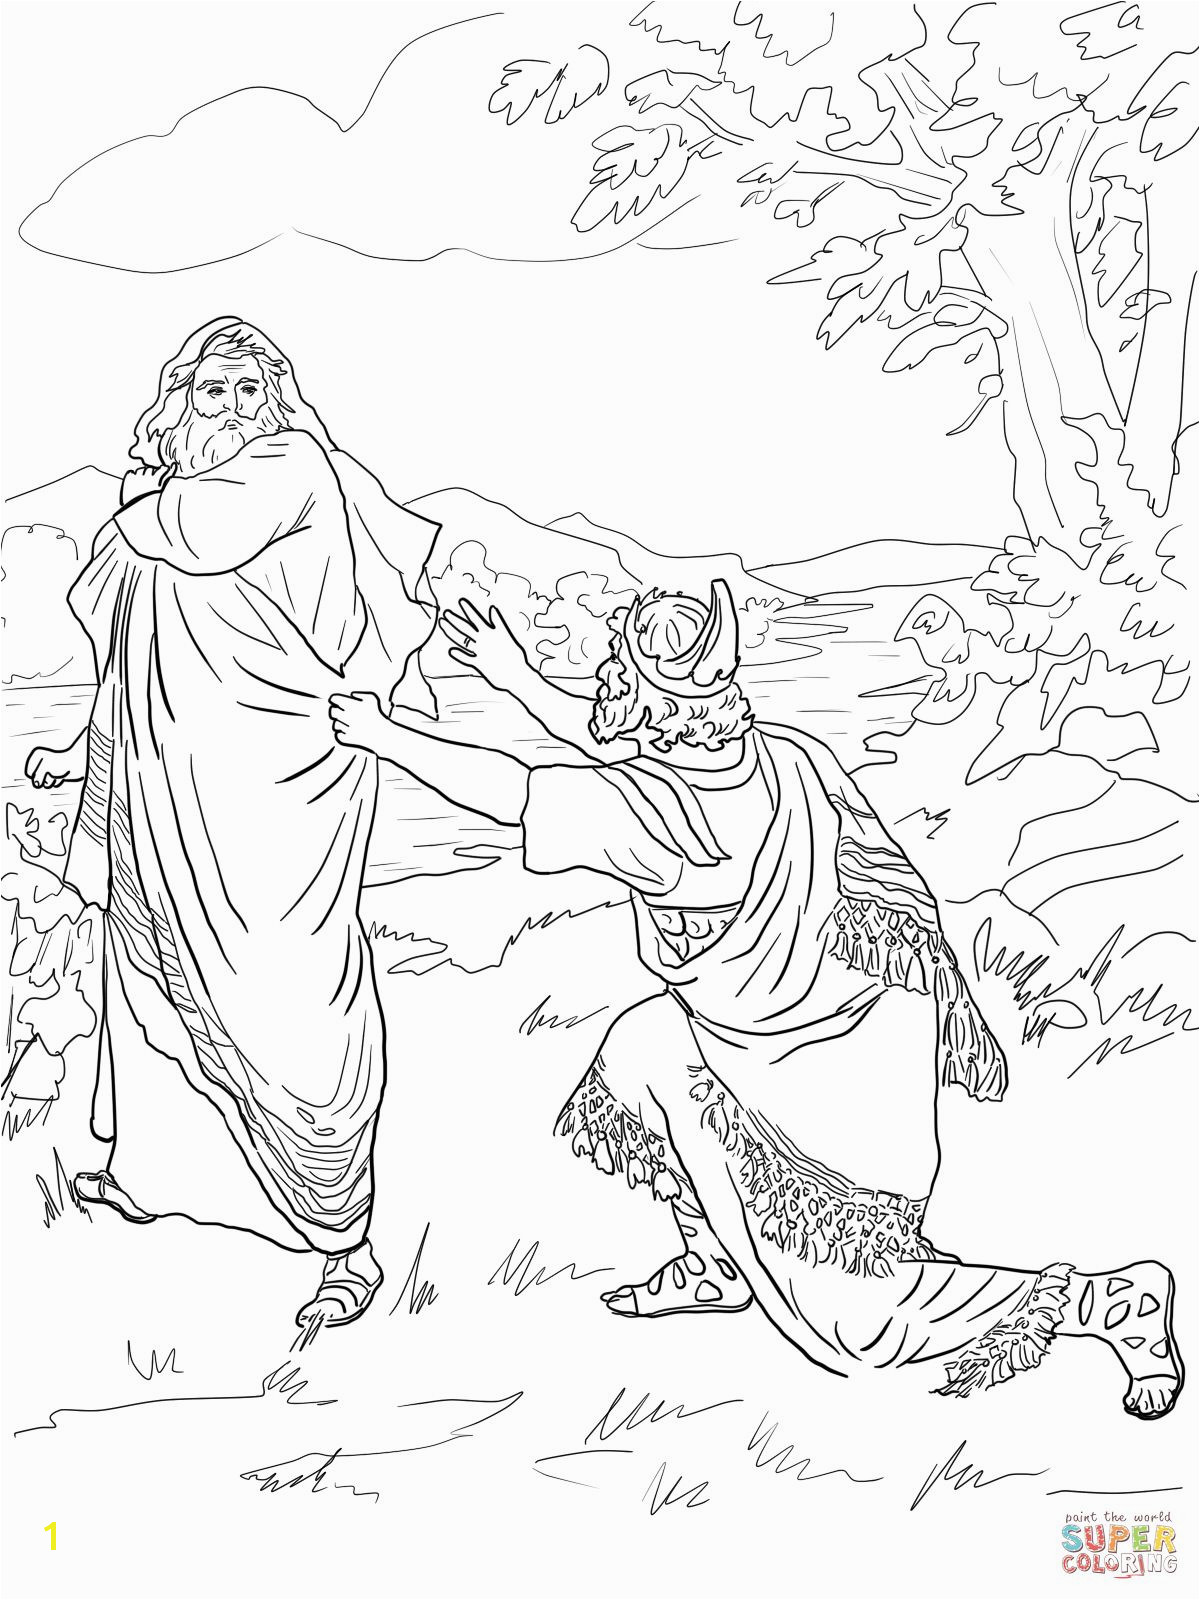 Free Printable Bible Coloring Pages Samuel Samuel Rechaza A Saºl Coloring Pages Religion